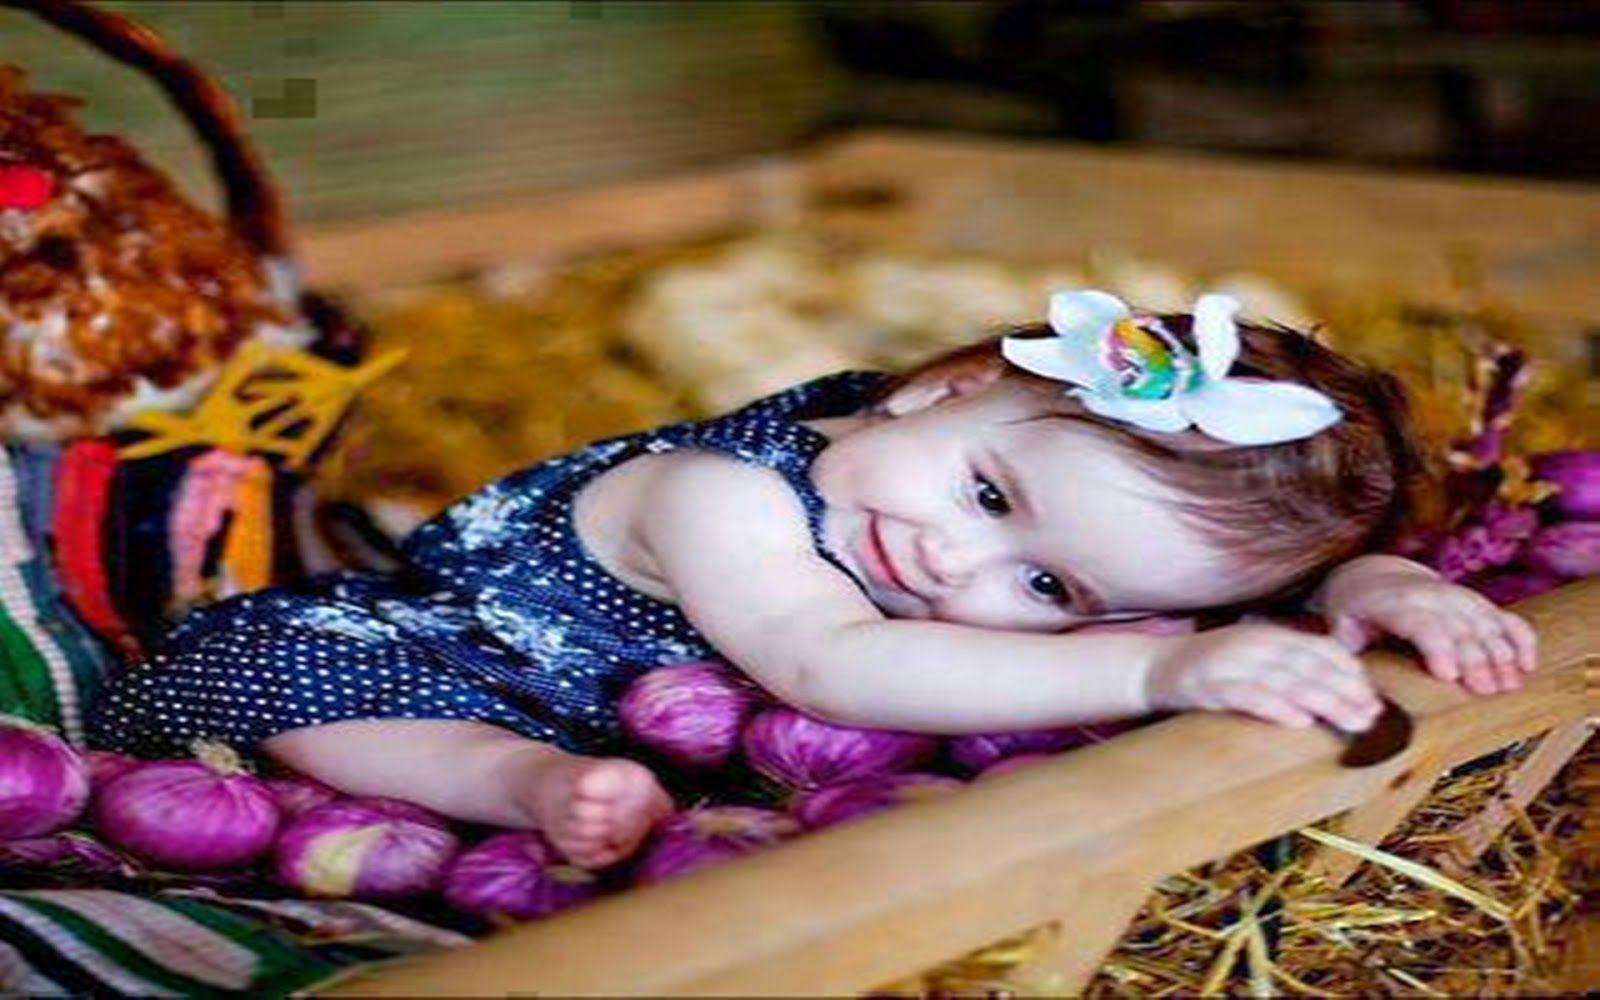 World Cutest Baby wallpaper 2014 Charming collection of Photo